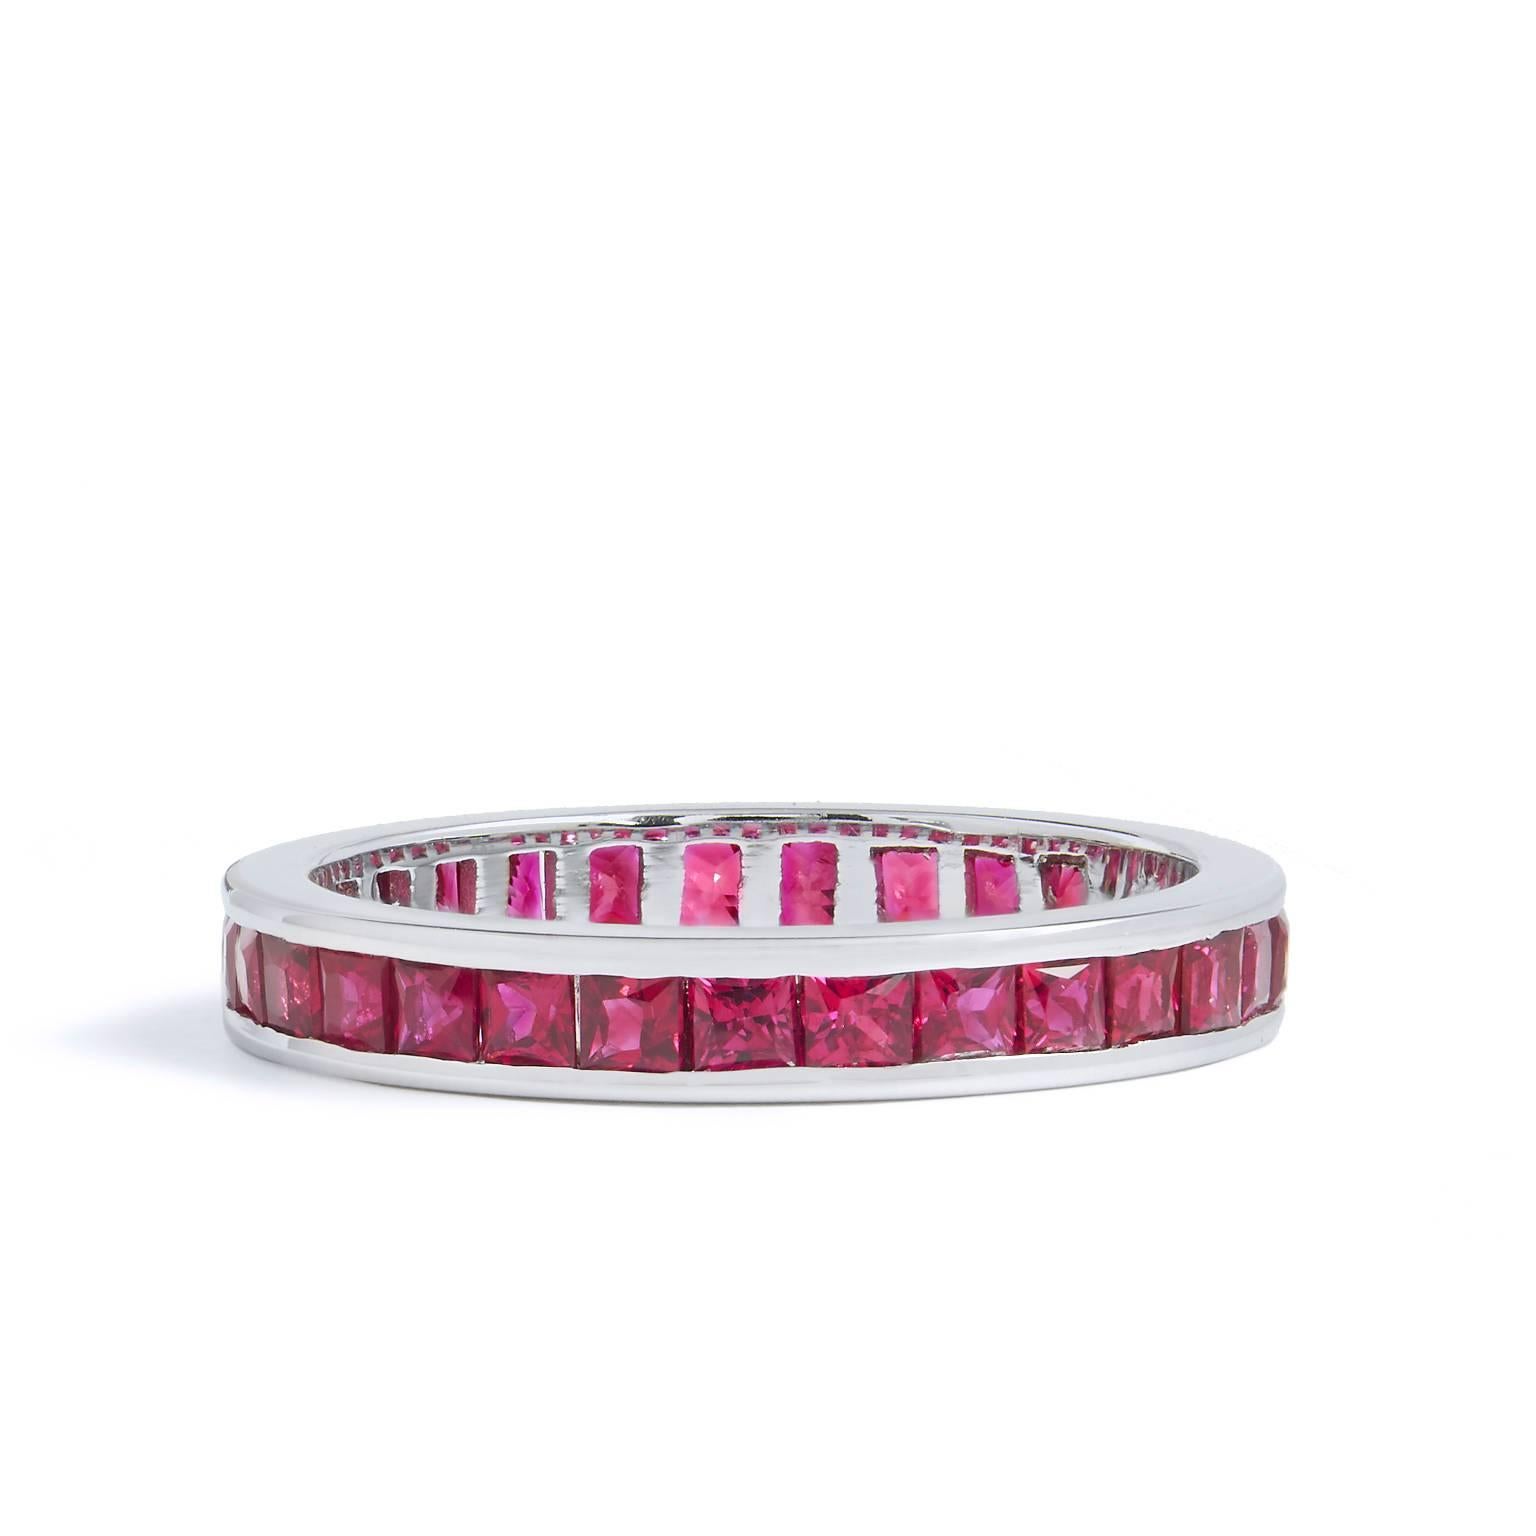 Modern Handcrafted 1.76 Carat Ruby Eternity Band Ring in 18 Karat White Gold